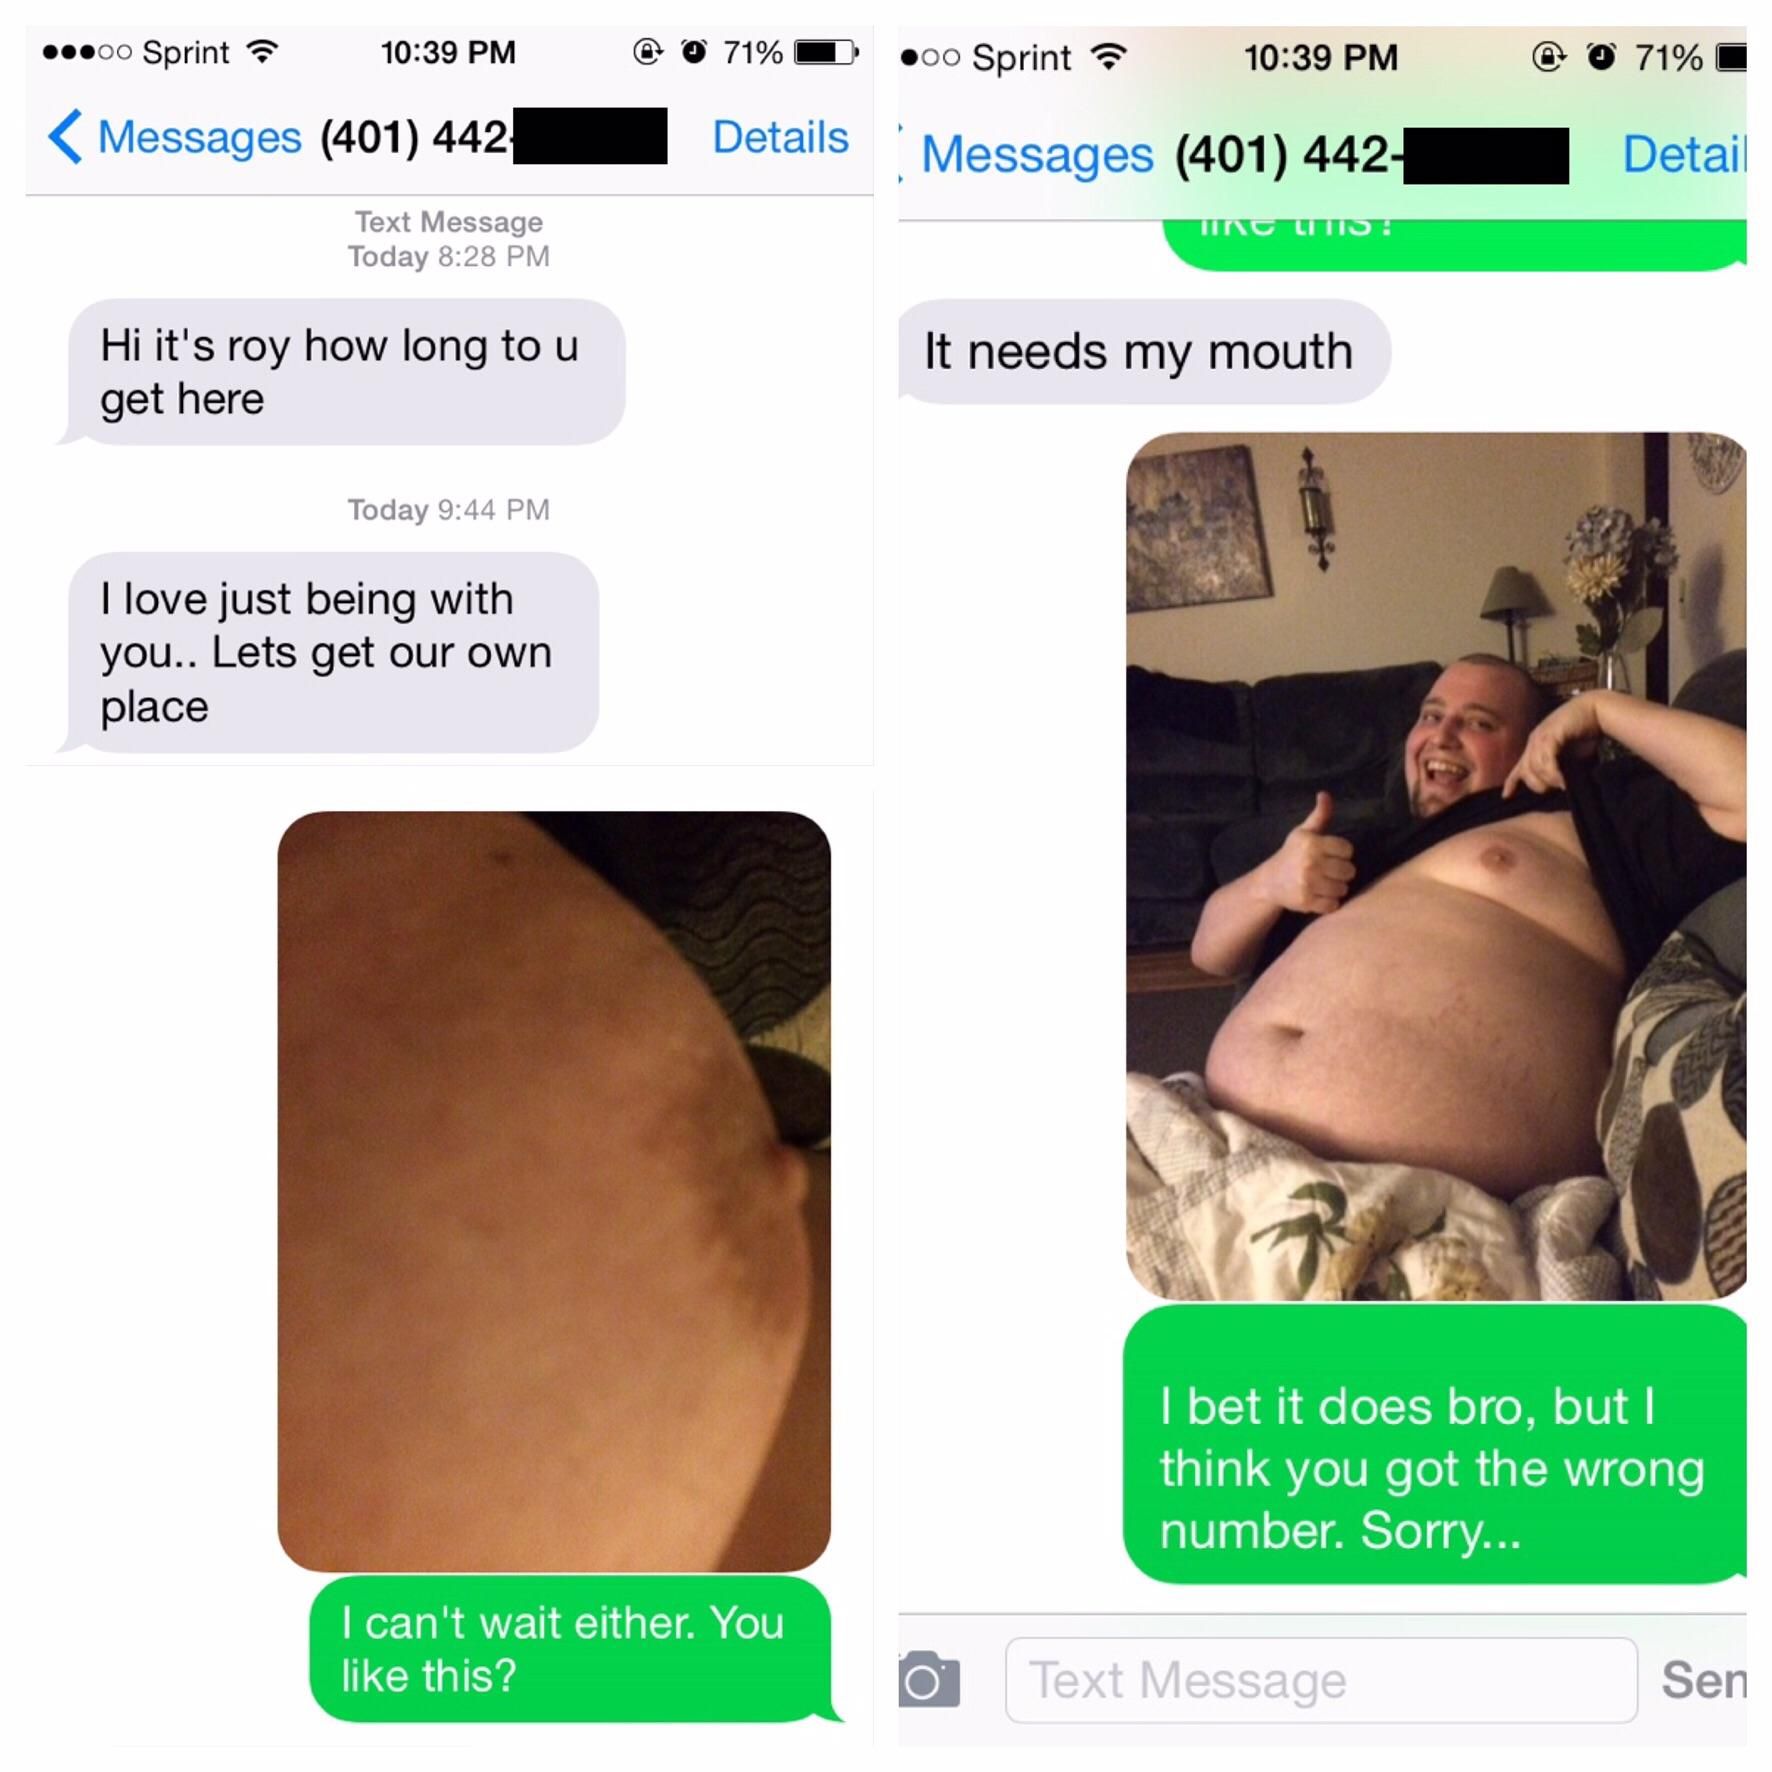 Wrong Number, Sorry bro...